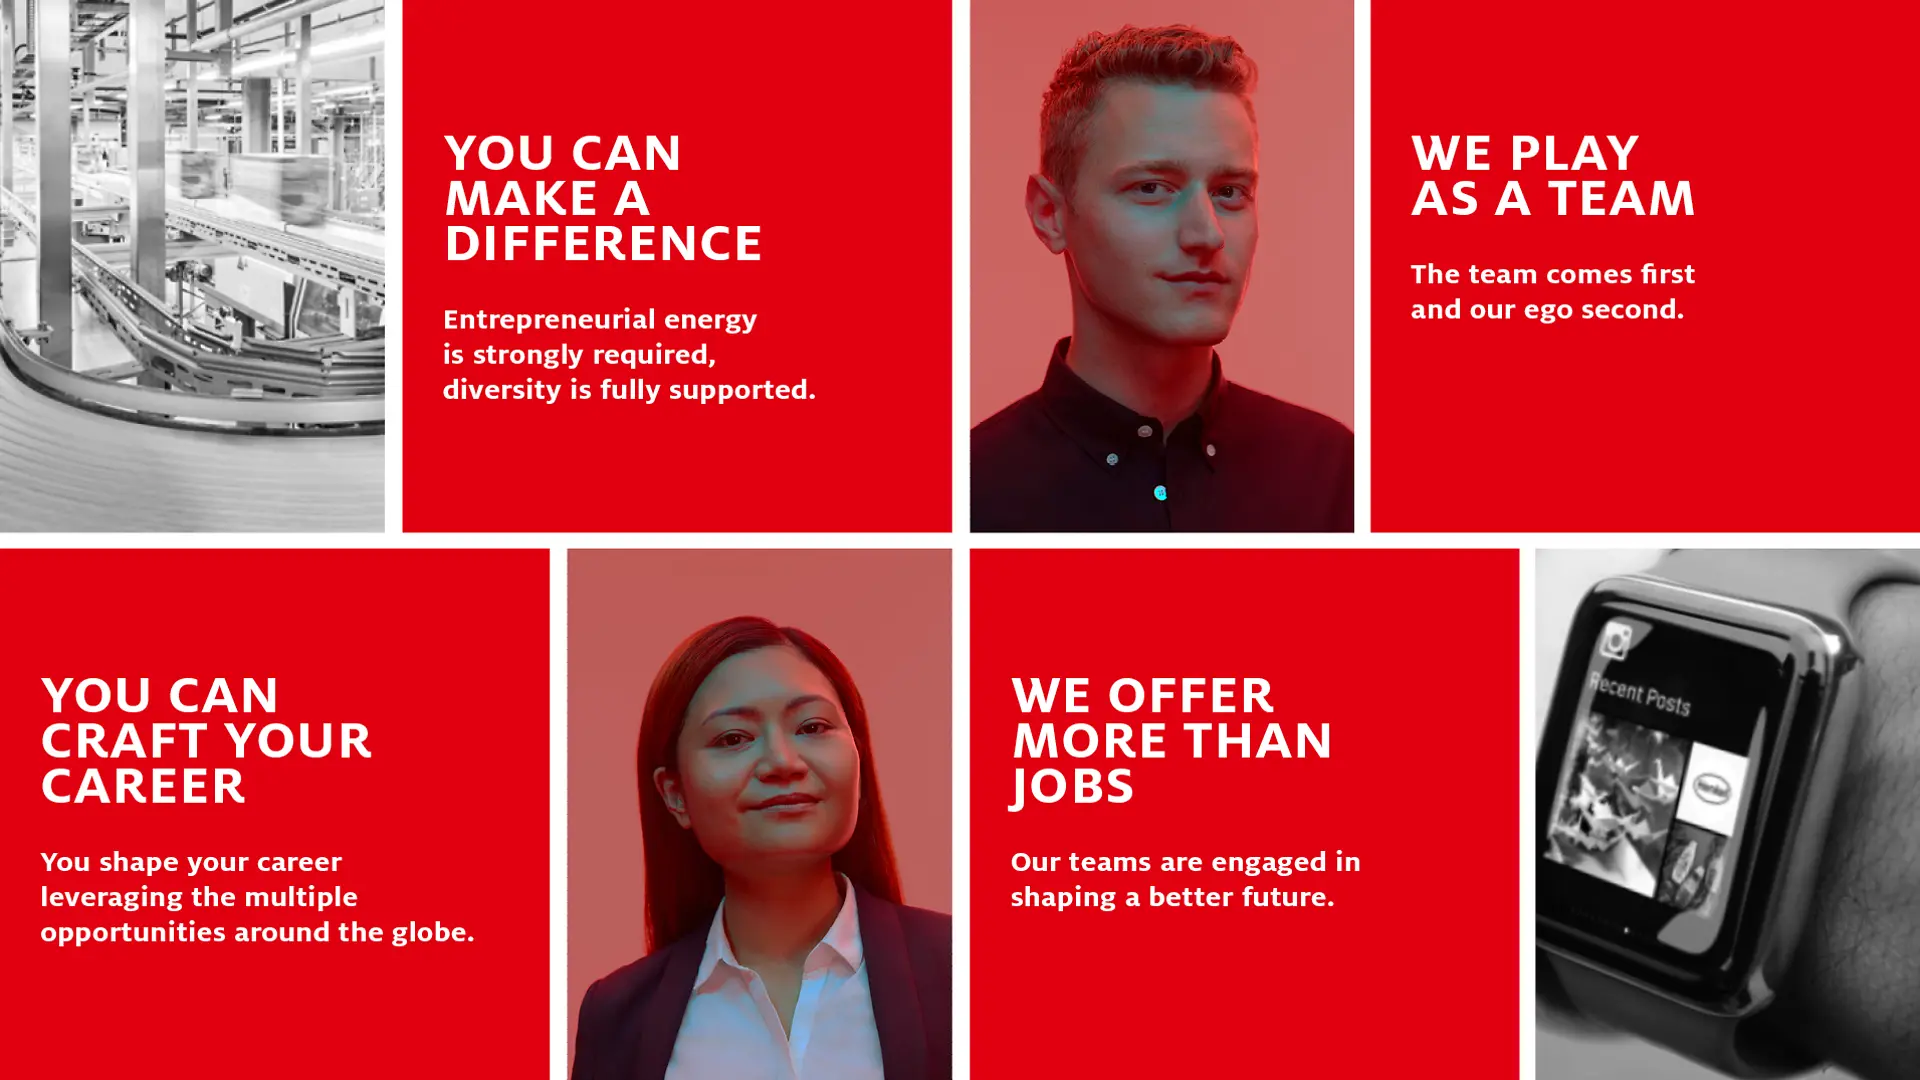 The campaign focuses on Henkel’s value as an employer.